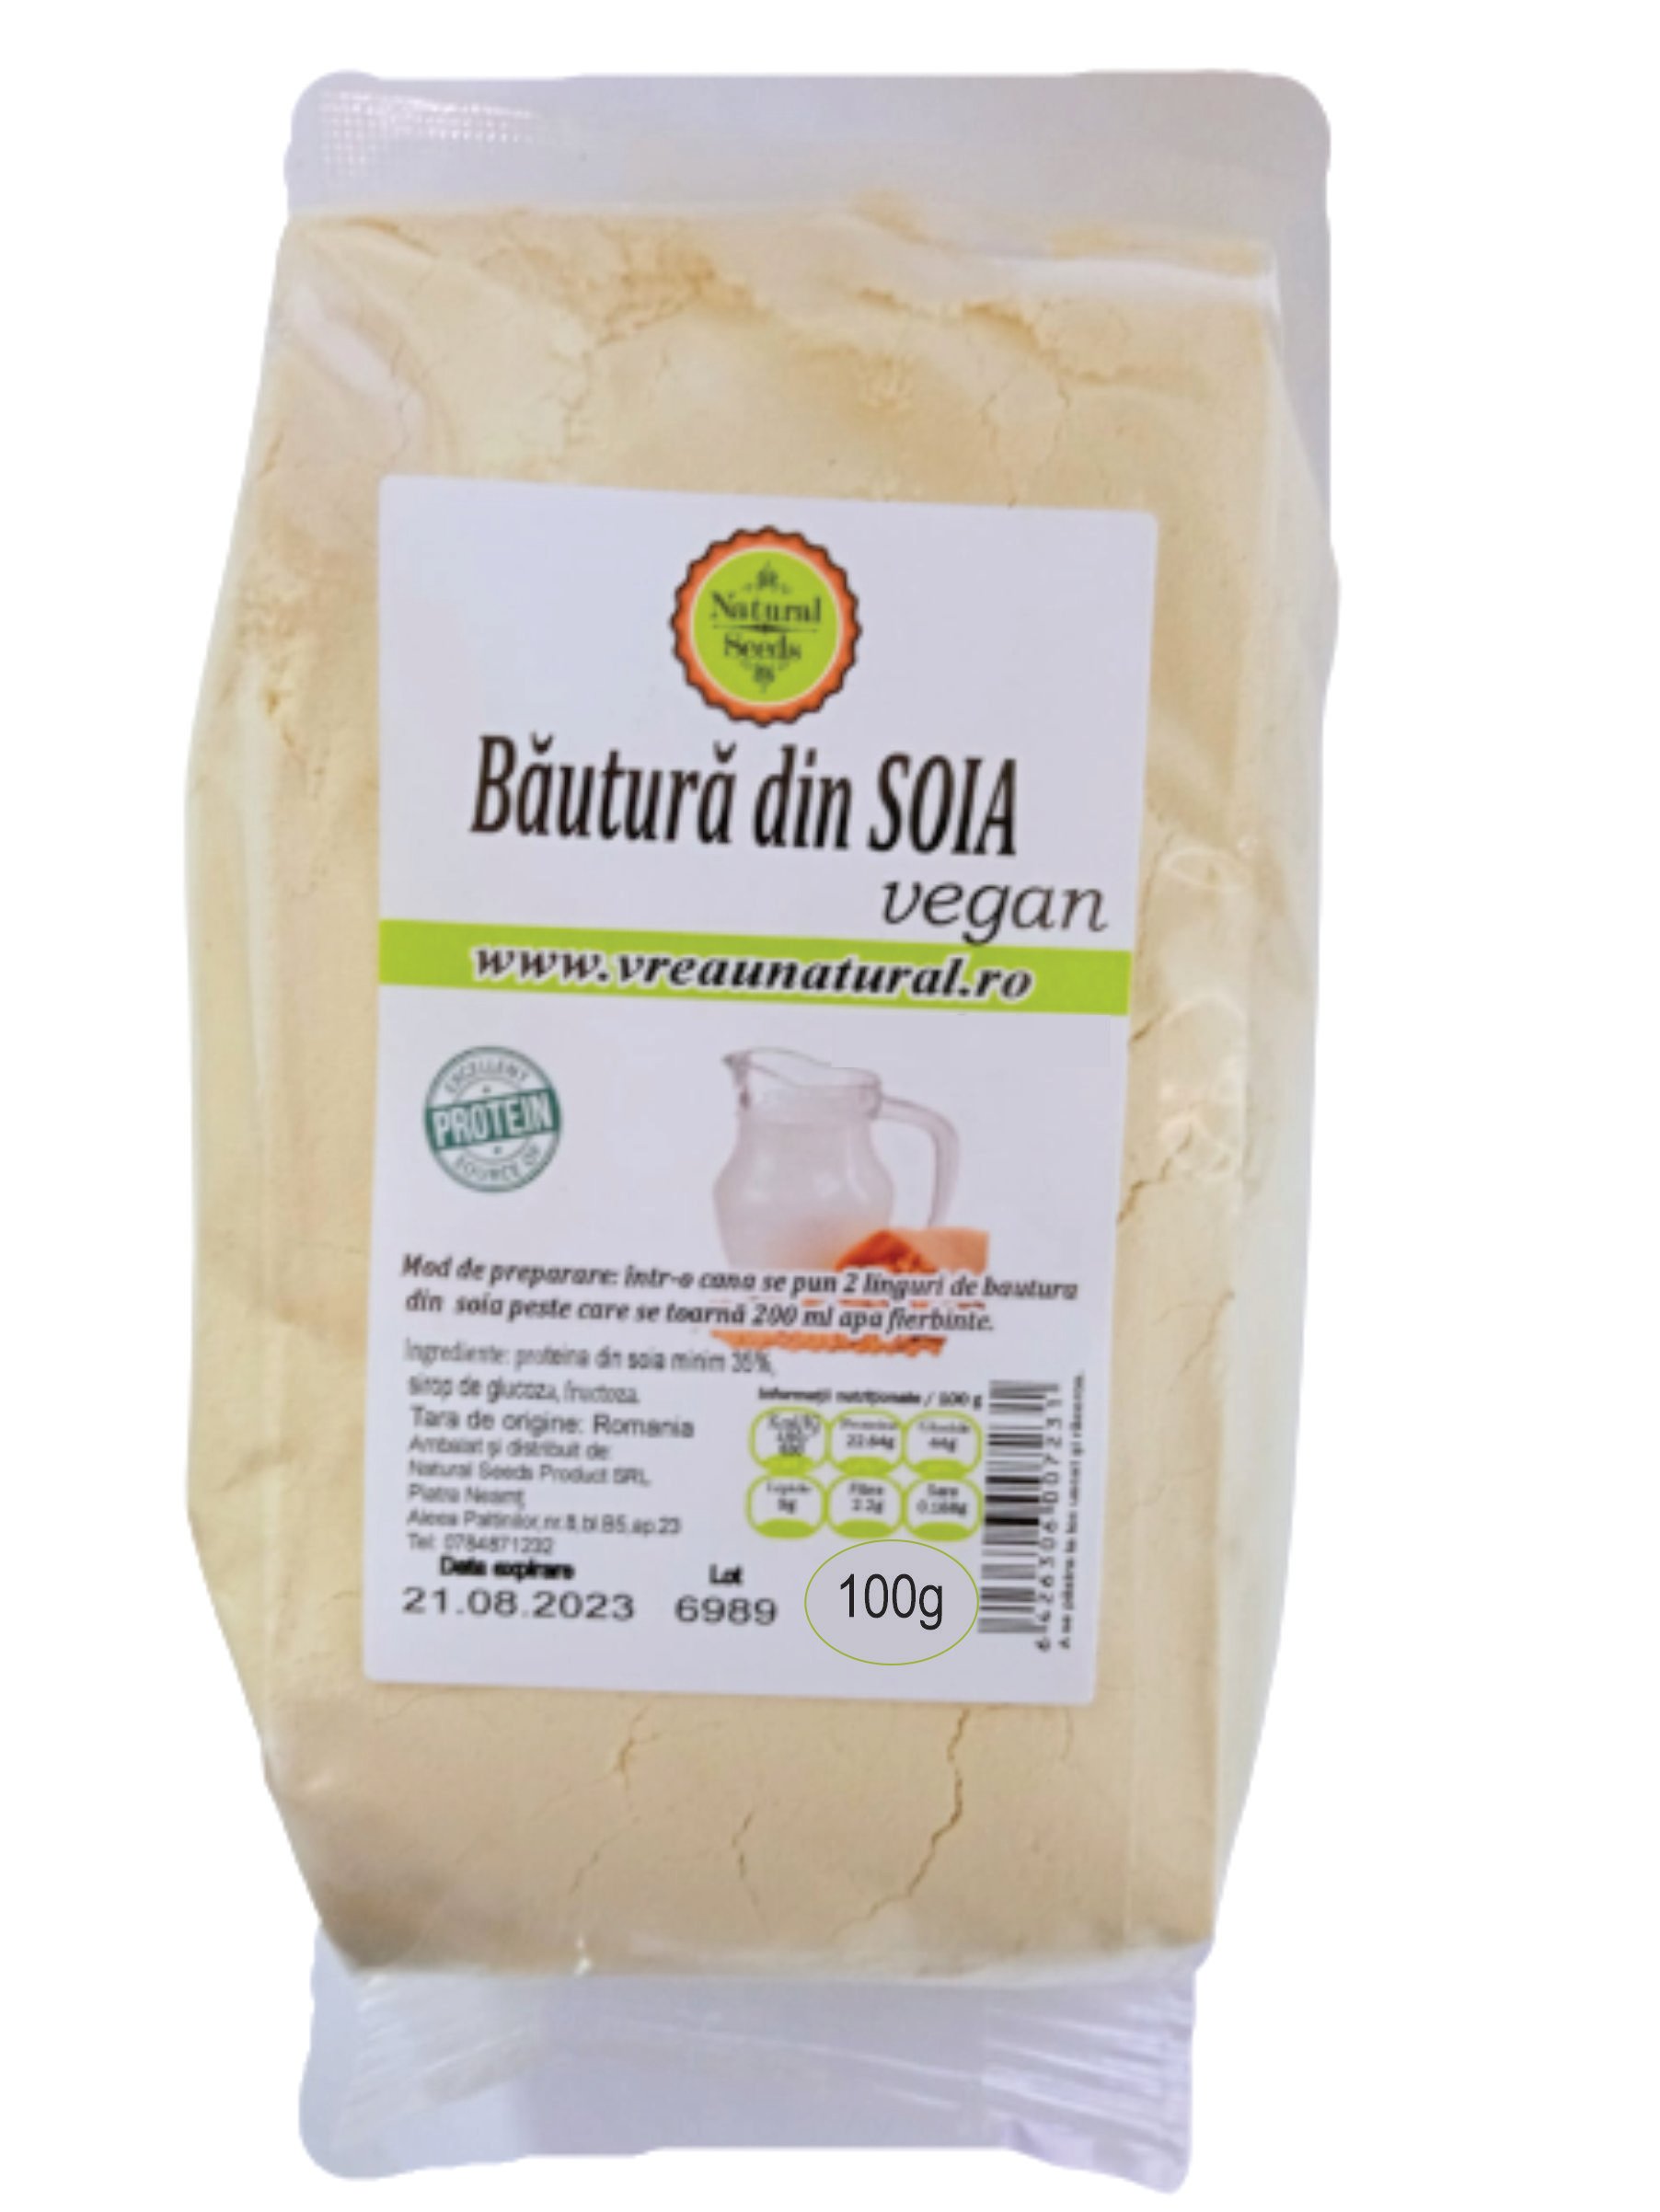 Bautura instant din soia, Natural Seeds Product